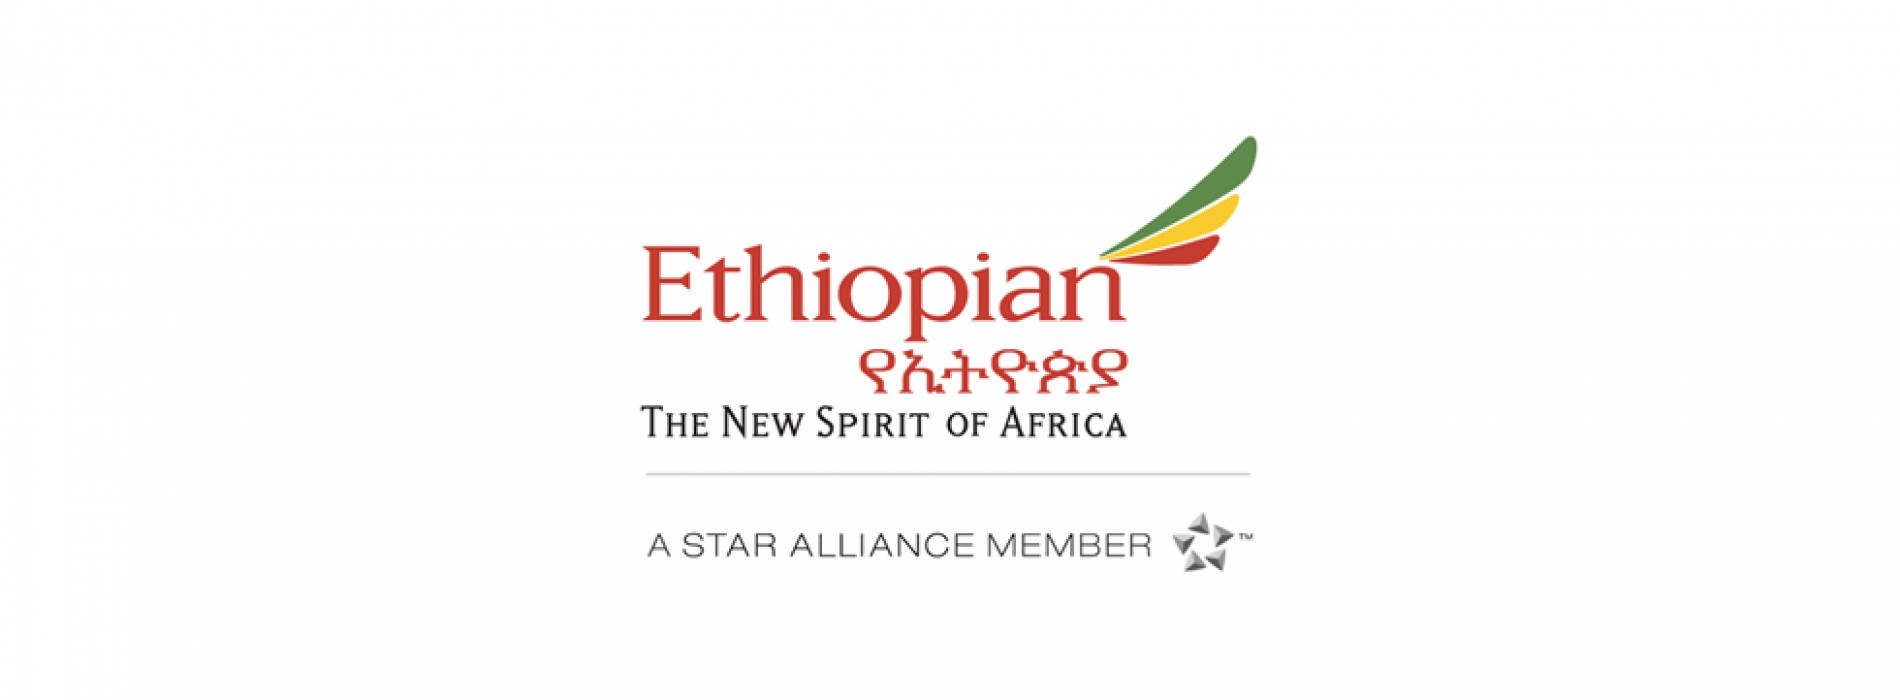 One of the Seven Wonders of the World comes to Ethiopian network